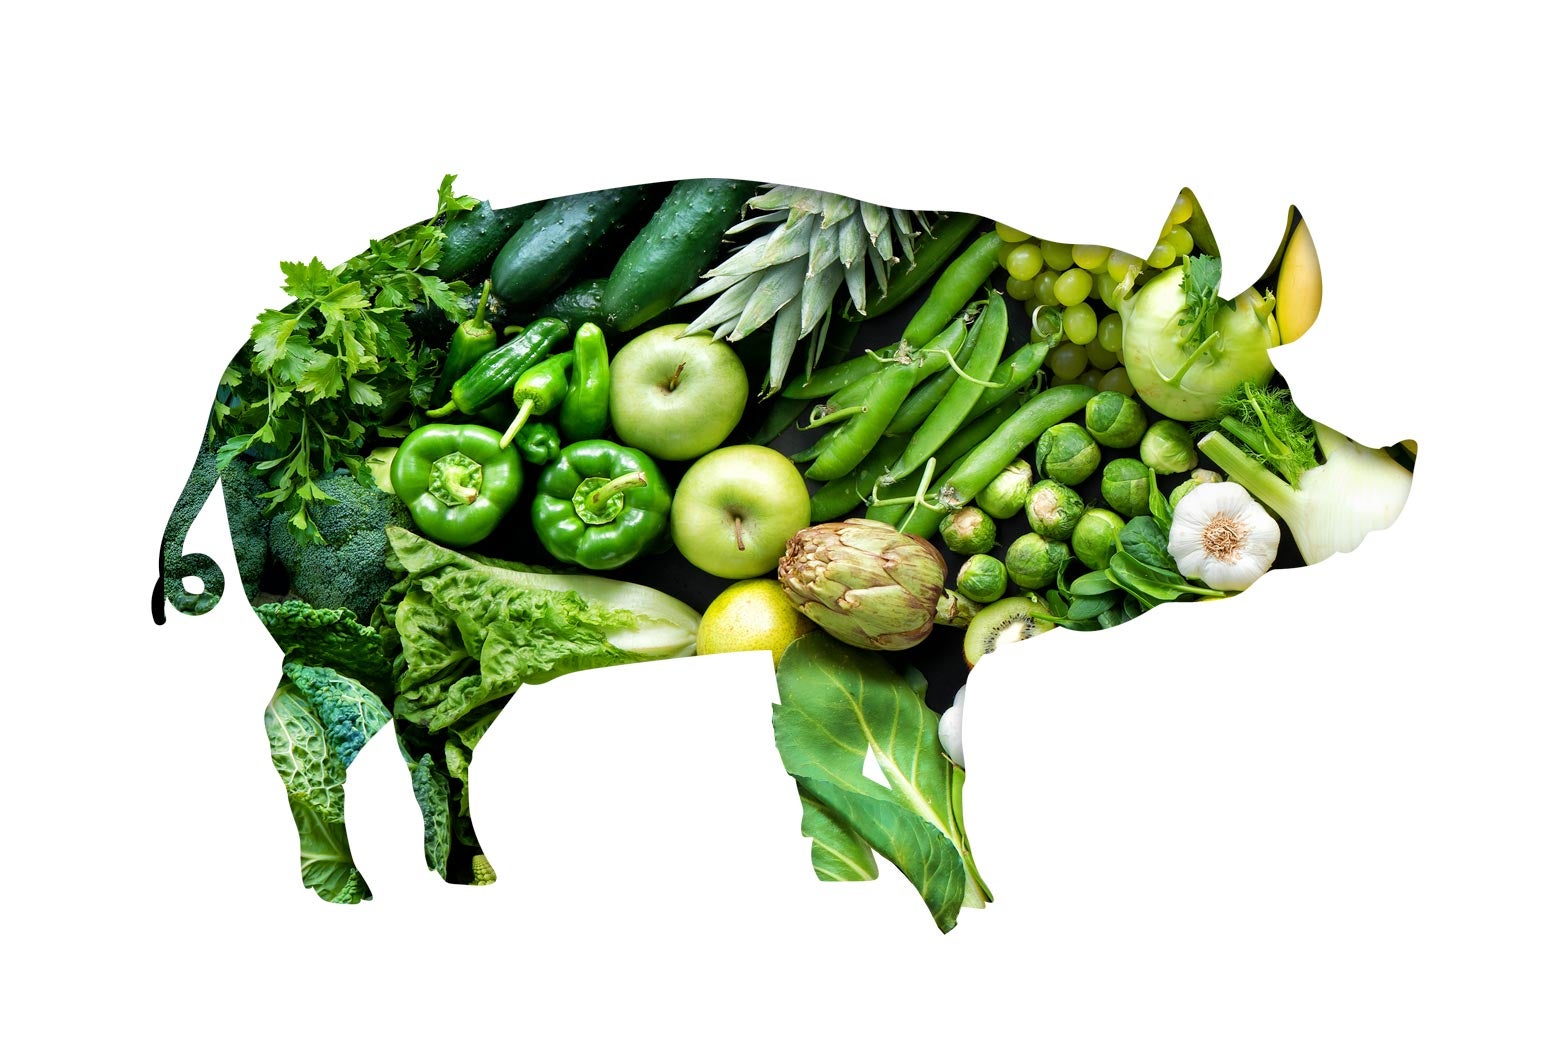 A silhouette of a pig made entirely out of green vegetables and plants.